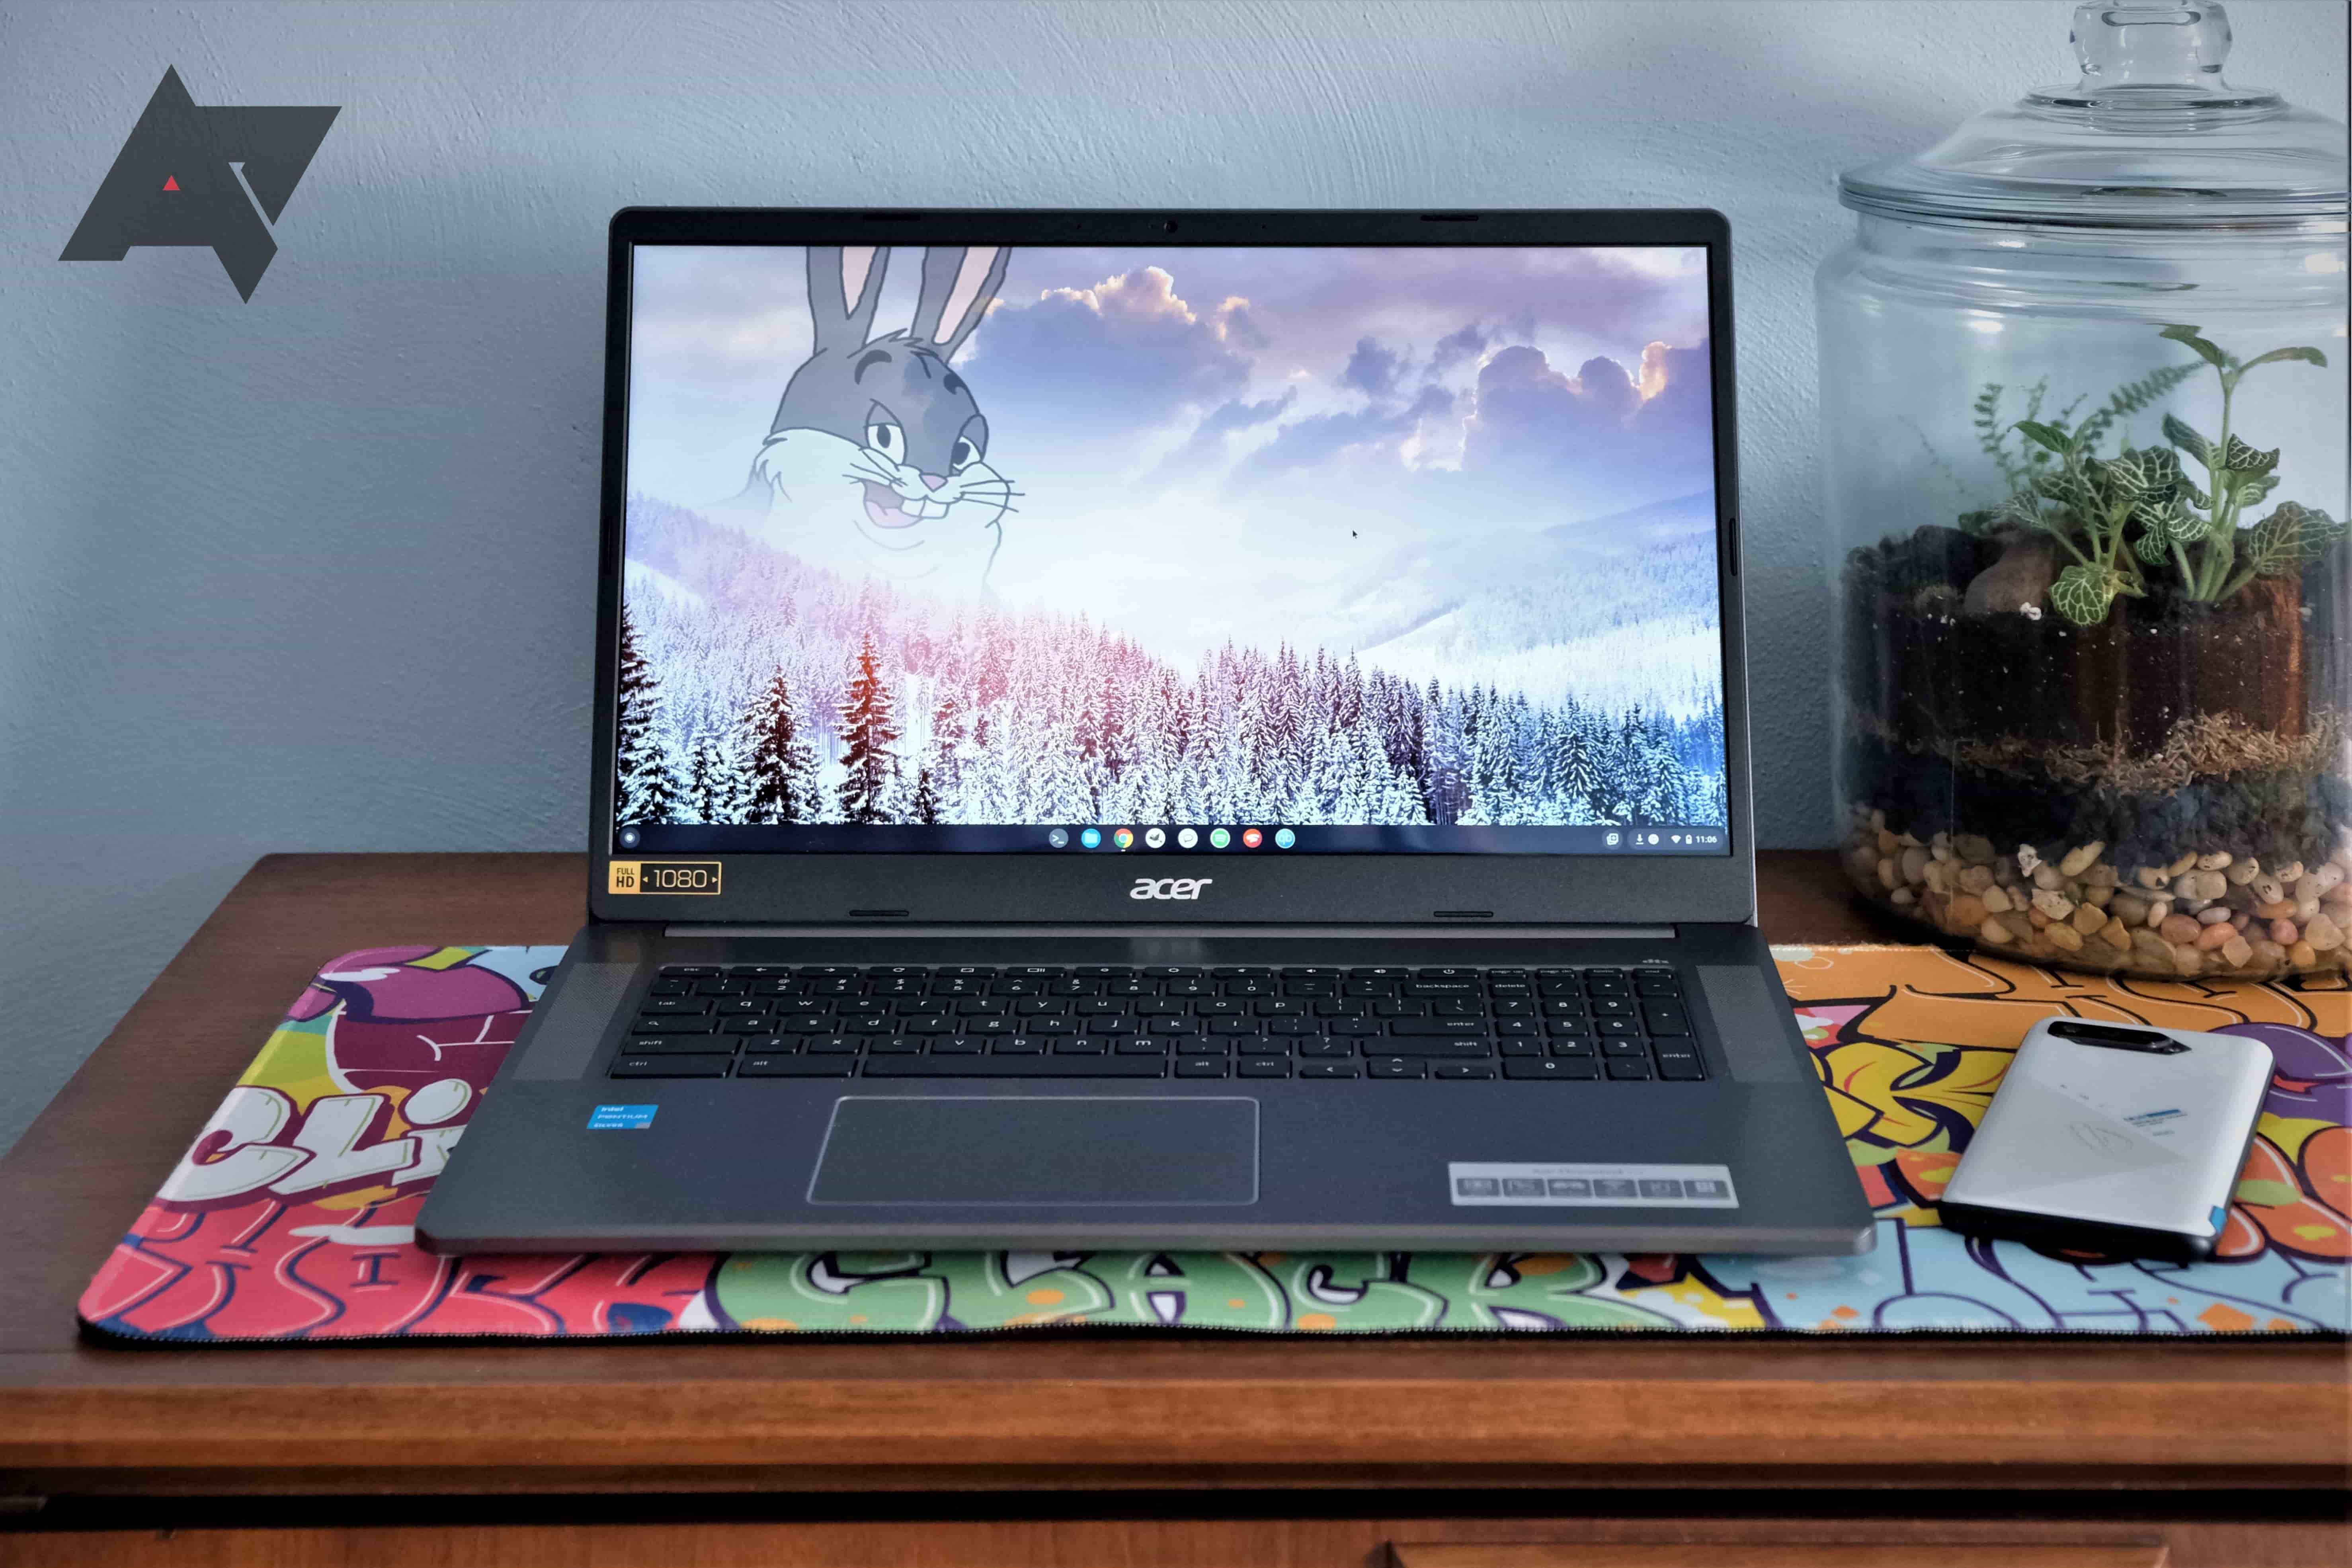 An Acer Chromebook 317 sitting on a wooden desk with a plant and phone next to it and a blue wall in the background and an image of a mountain with Big Chungus on it